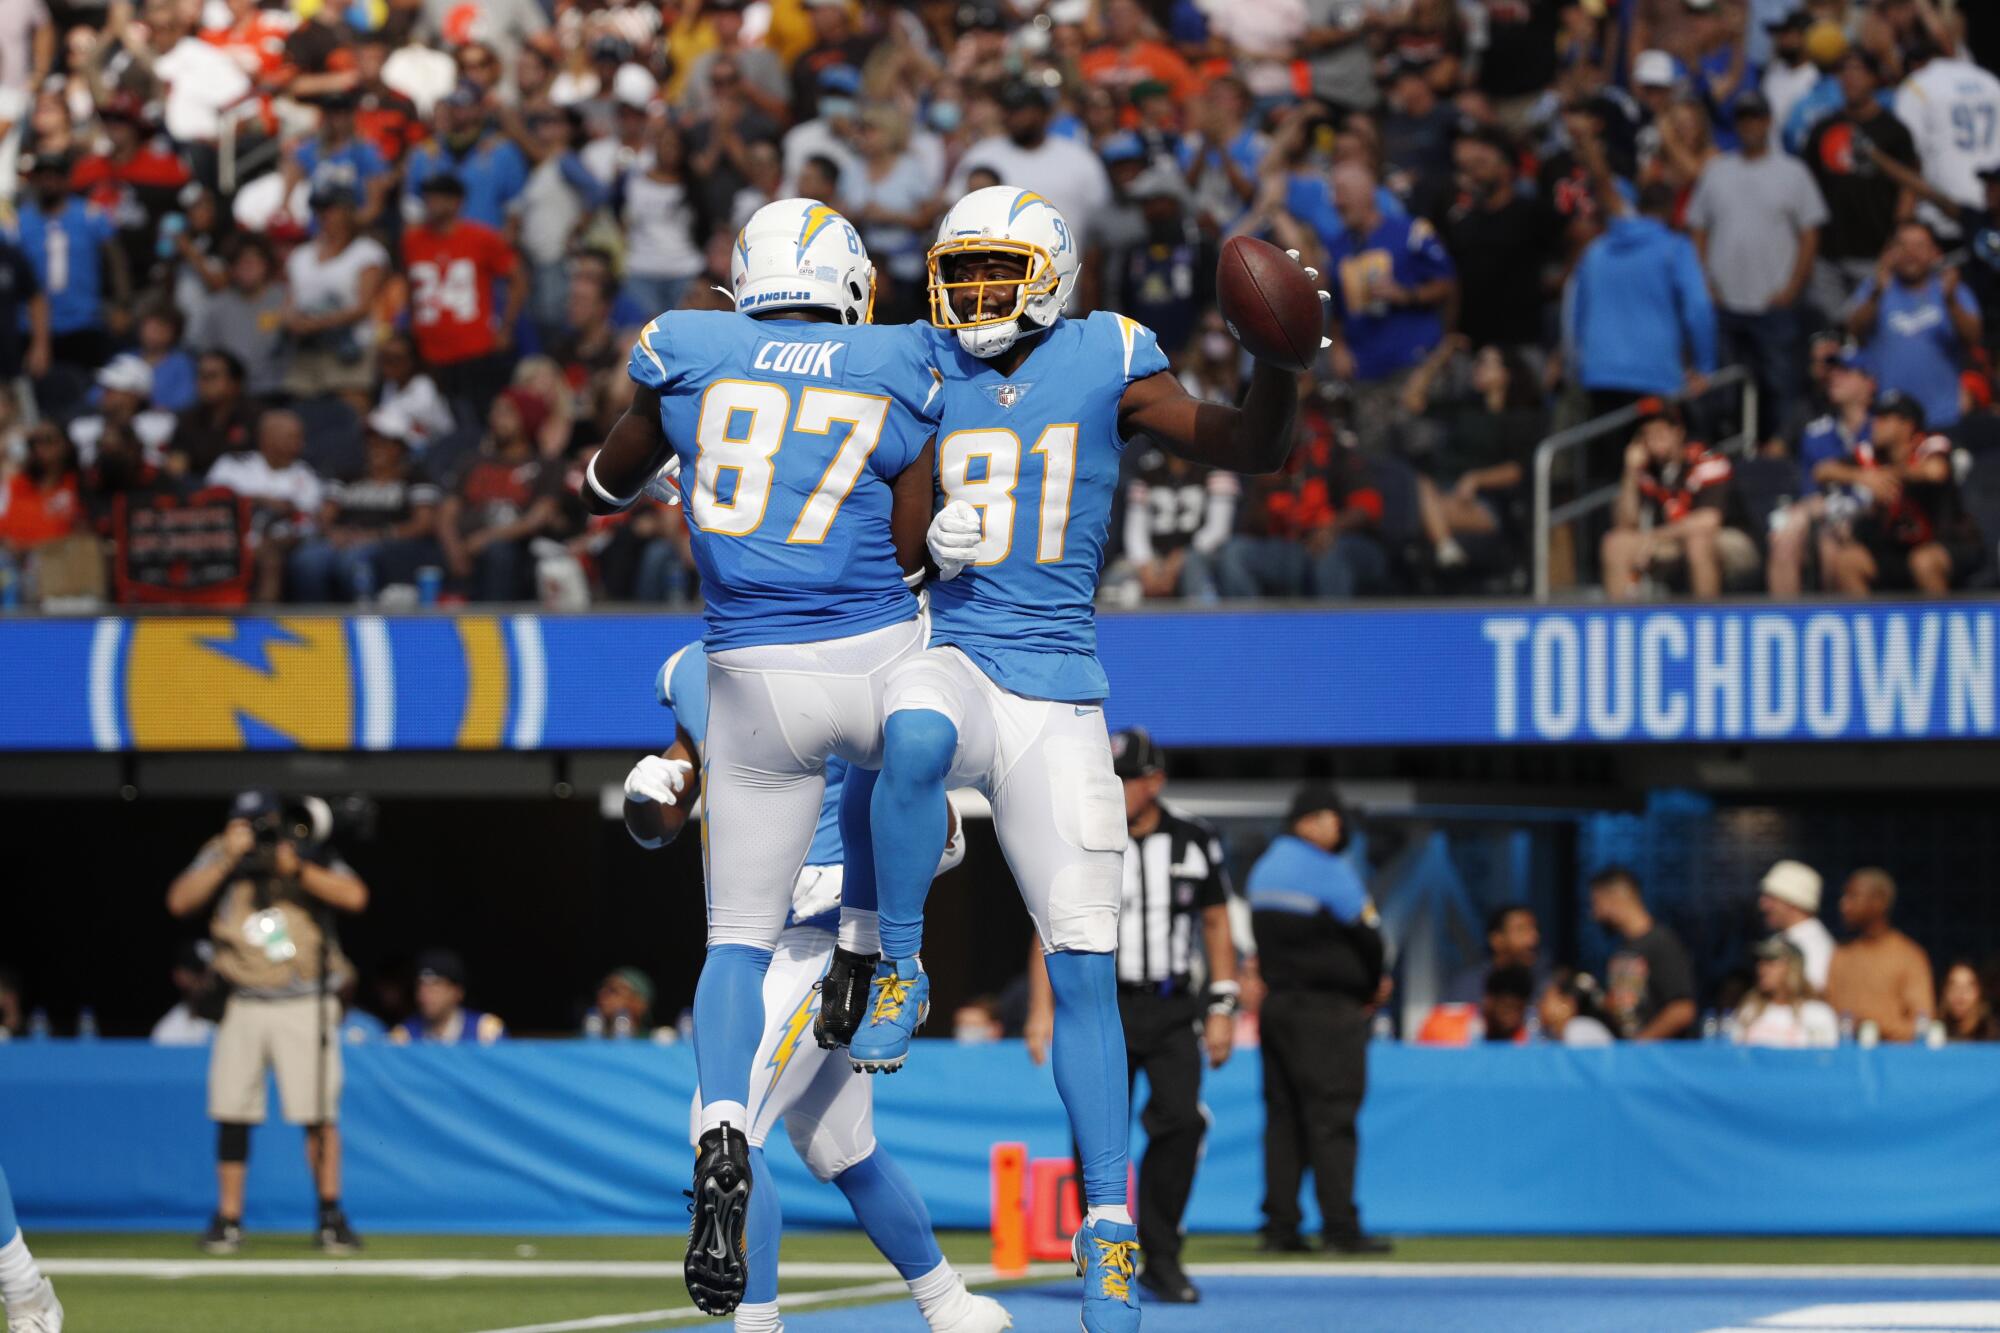 Photos: Chargers defeat Browns in thriller at SoFi Stadium - Los